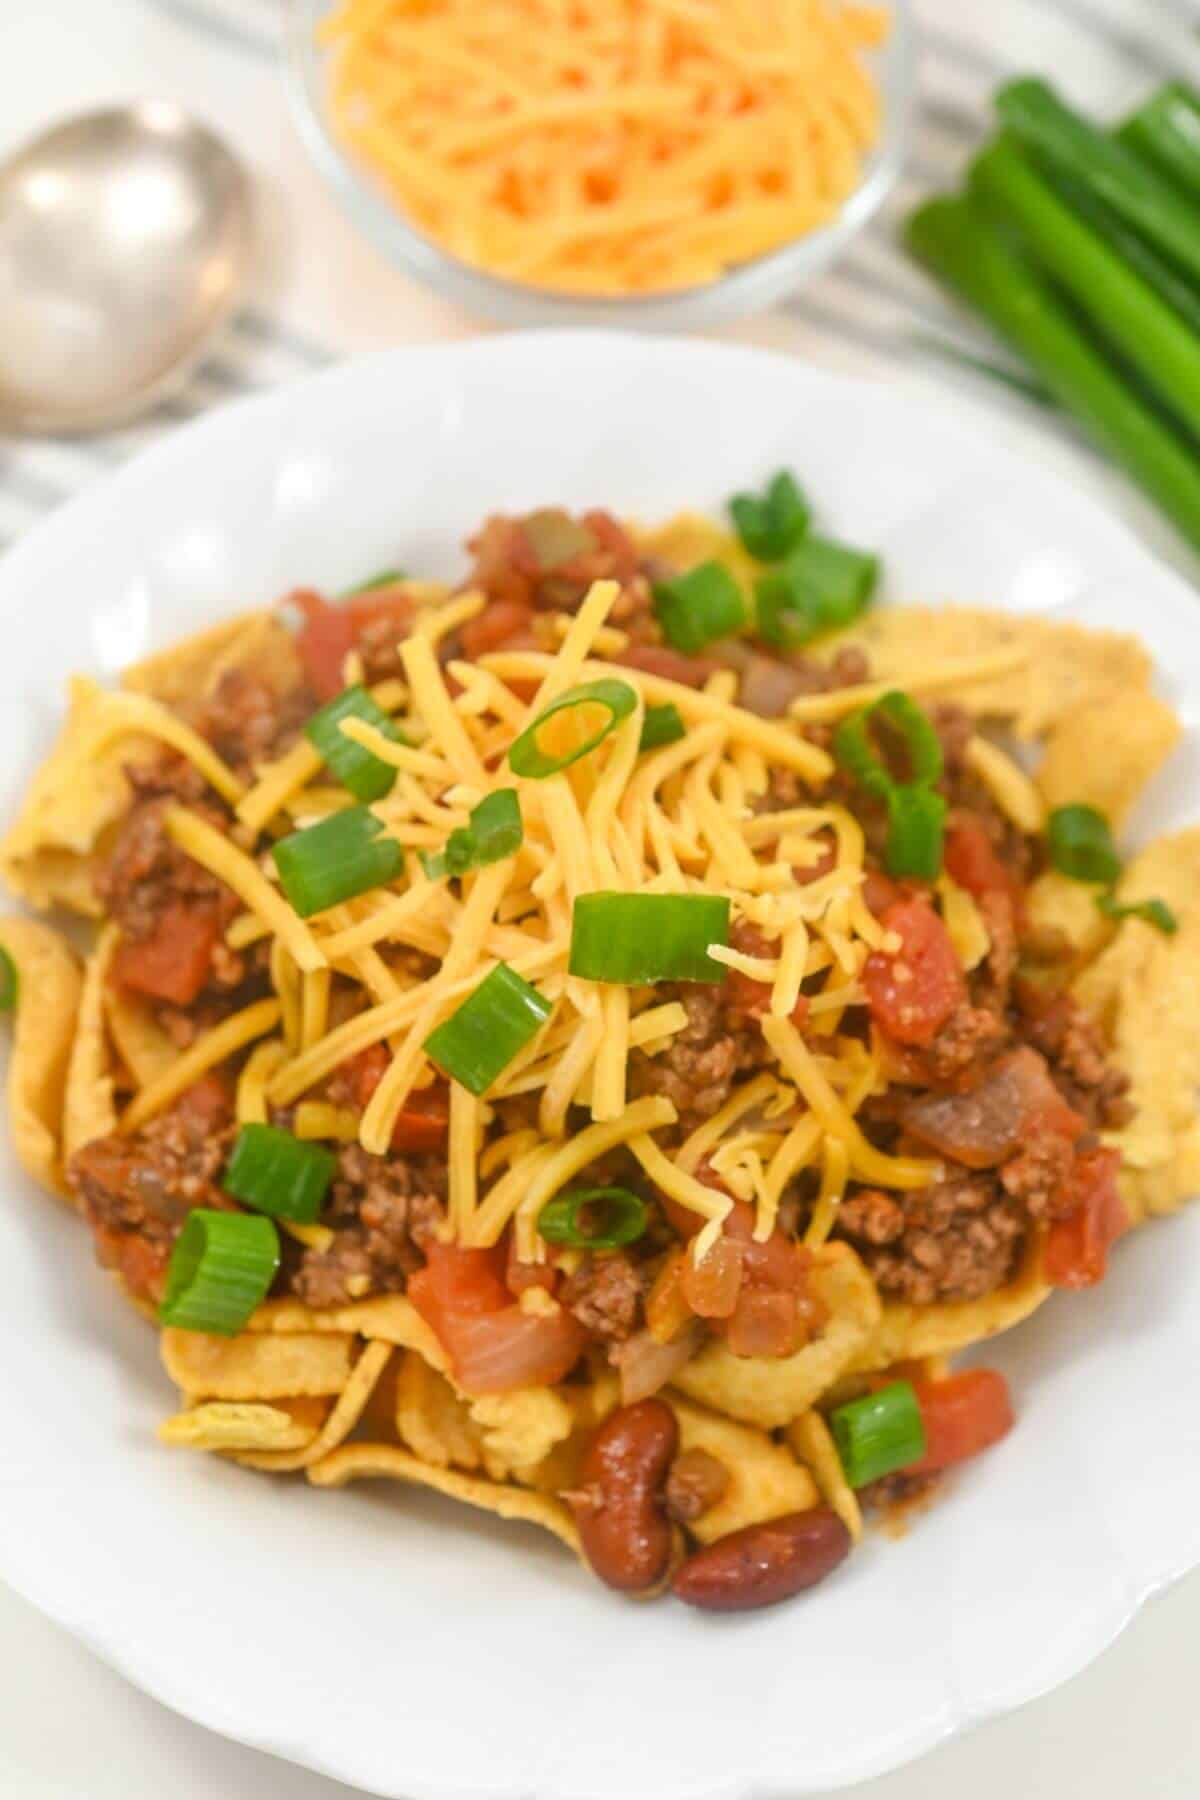 A plate of Frito chili pie topped with green onions and meat.